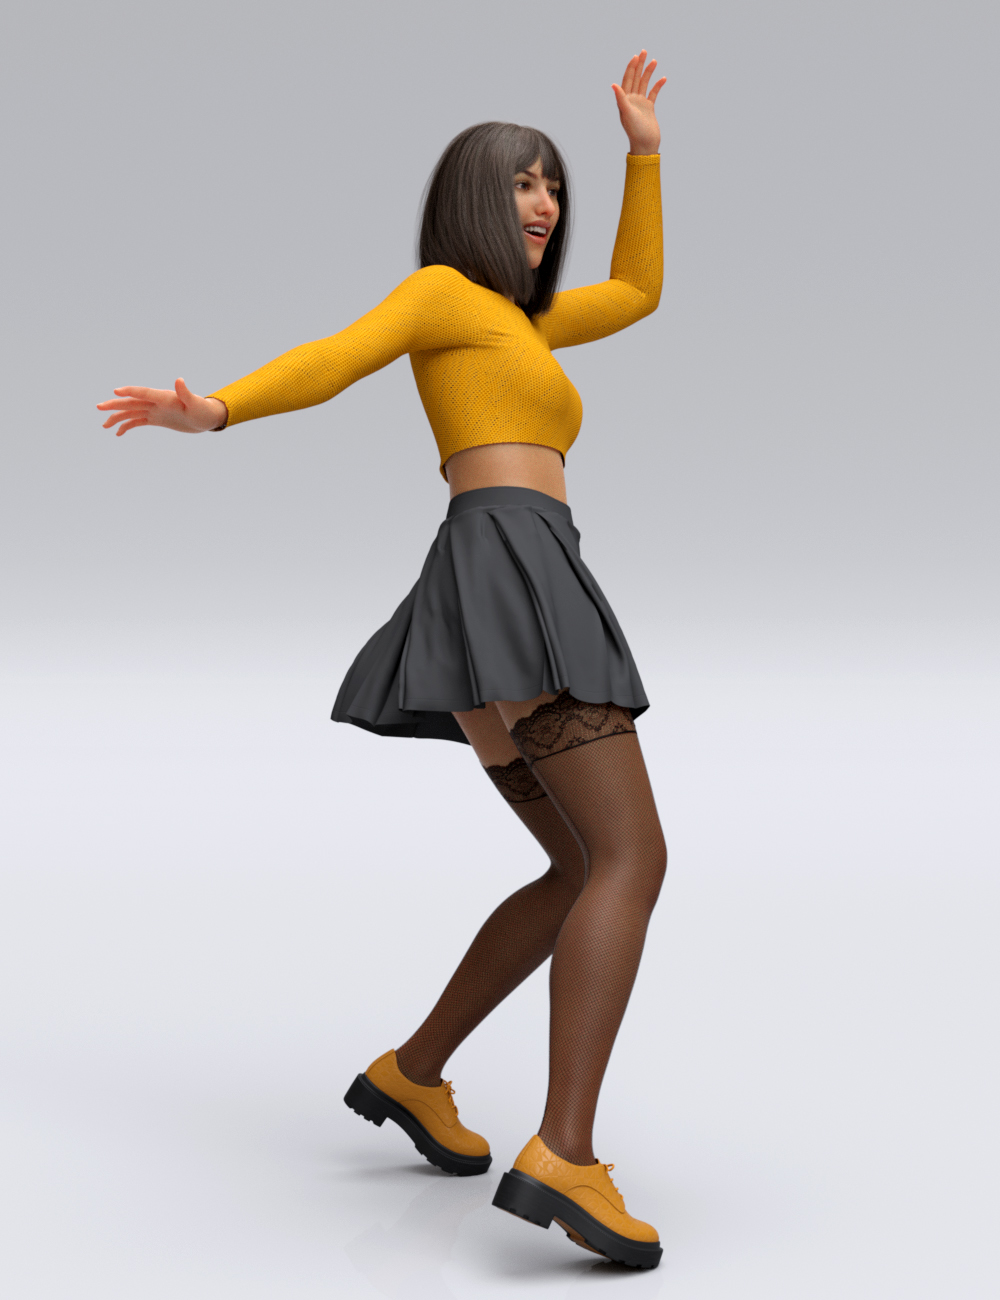 Dance Rhythmic V2 for Genesis 9, 8.1, and 8 by: Havanalibere, 3D Models by Daz 3D